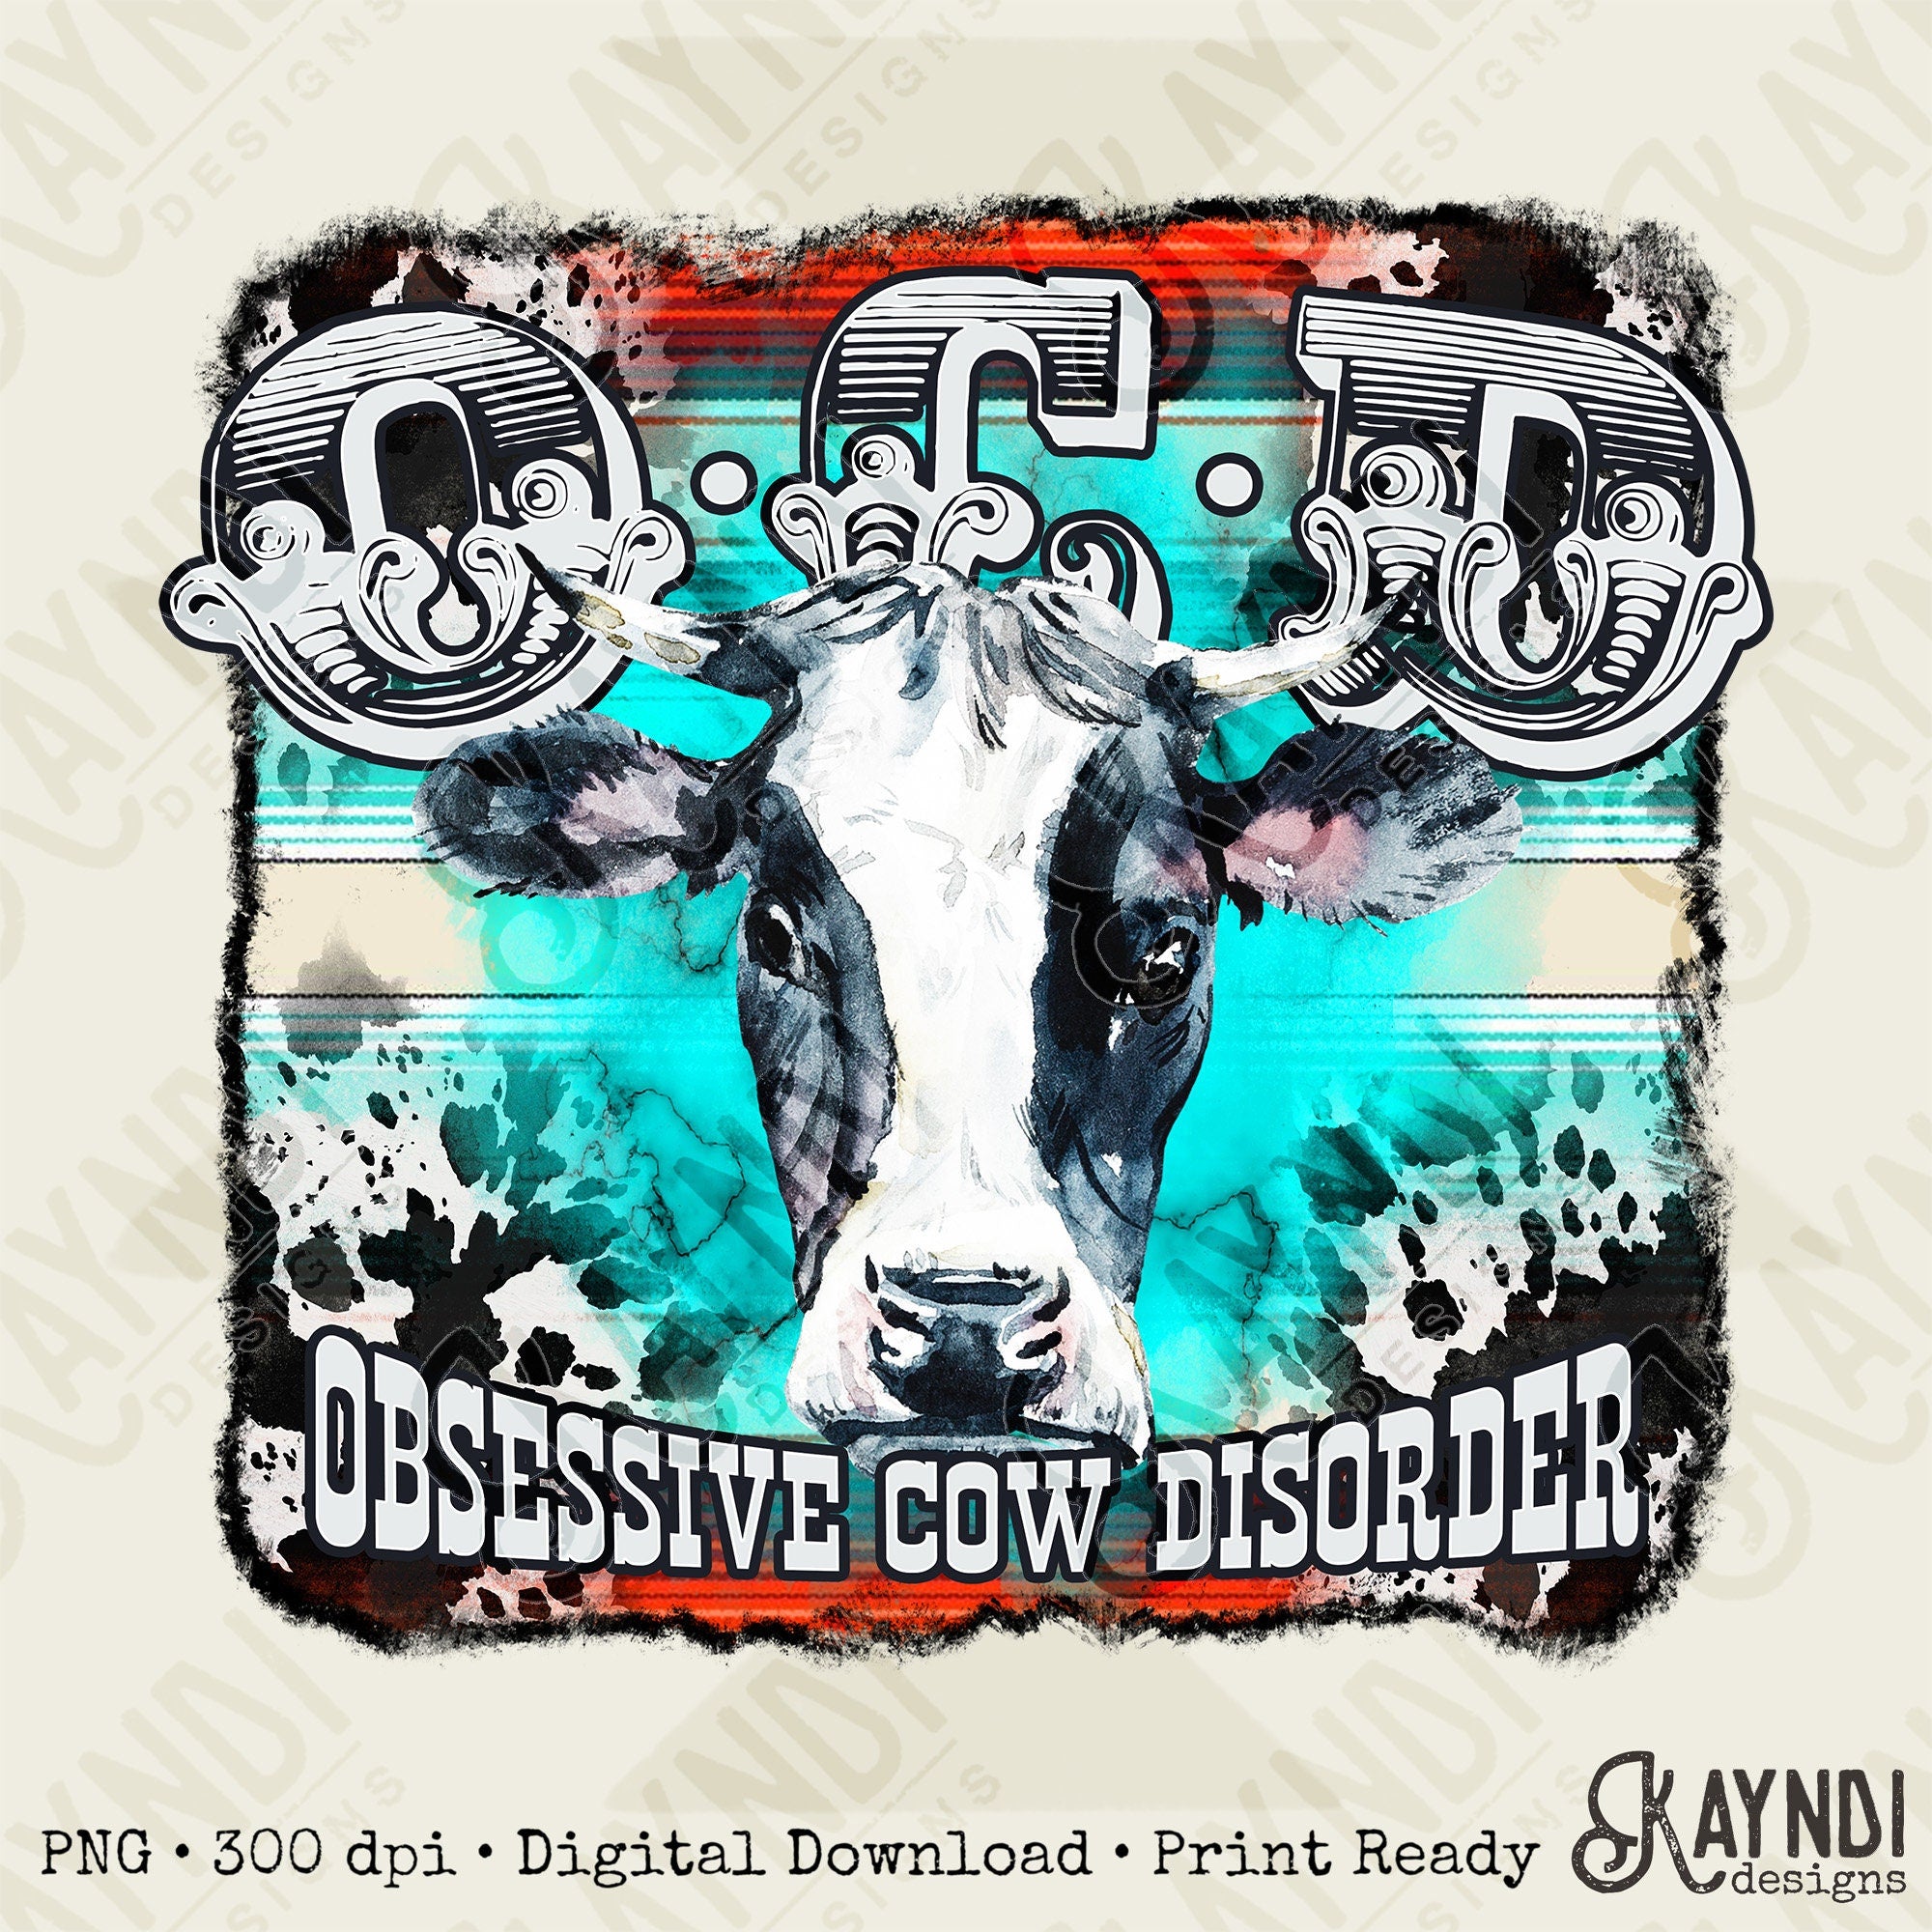 OCD Obsessive Cow Disorder Sublimation Design PNG Digital Download Printable Turquoise Cow Print Serape